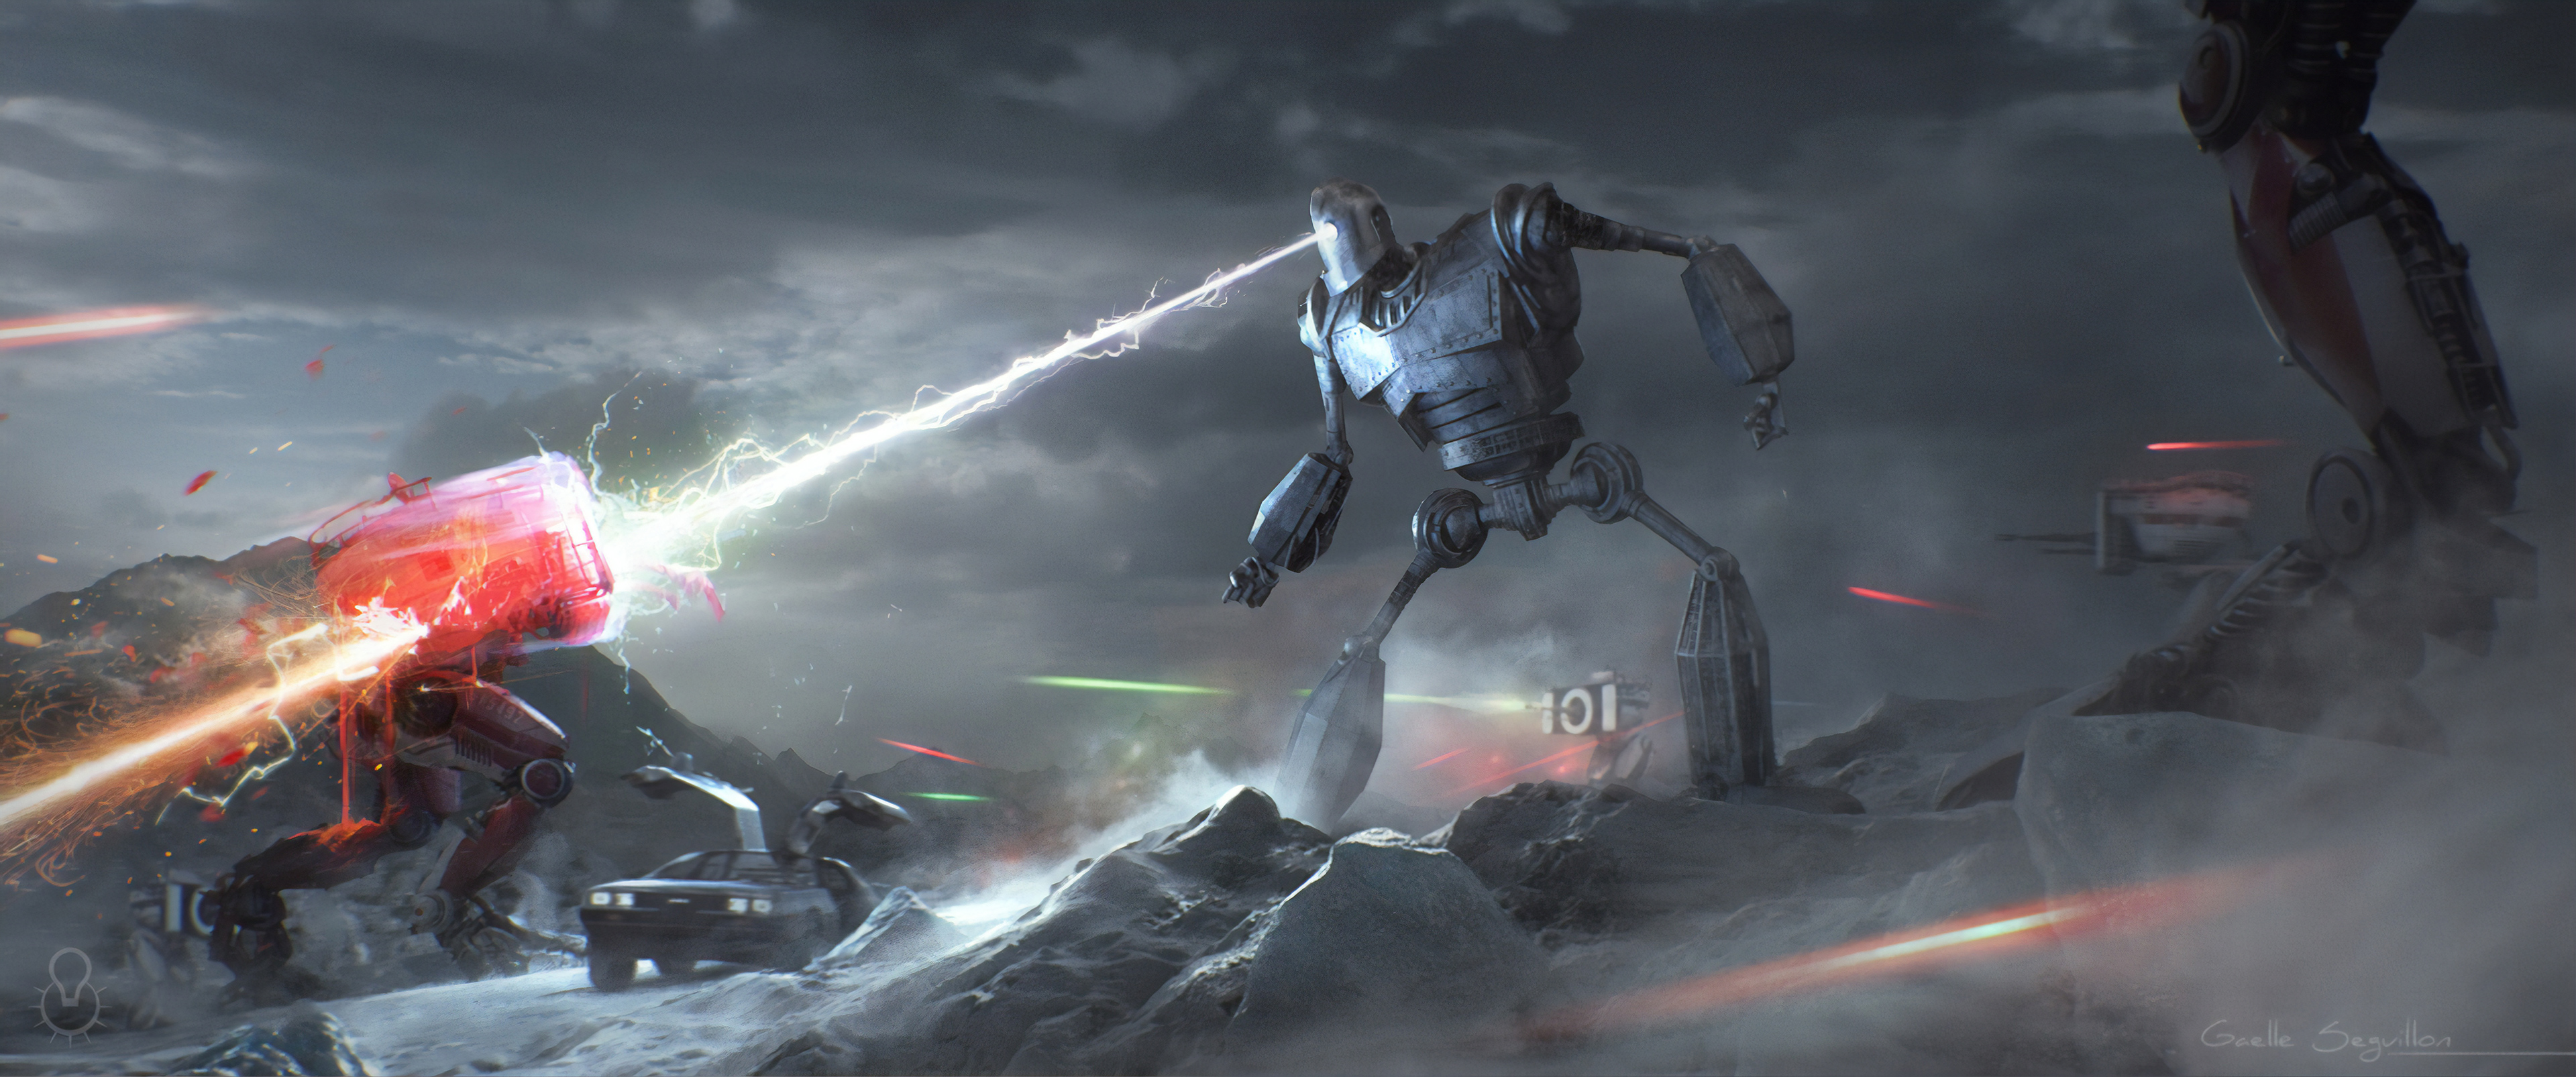 the iron giant, movie, ready player one, battle, robot